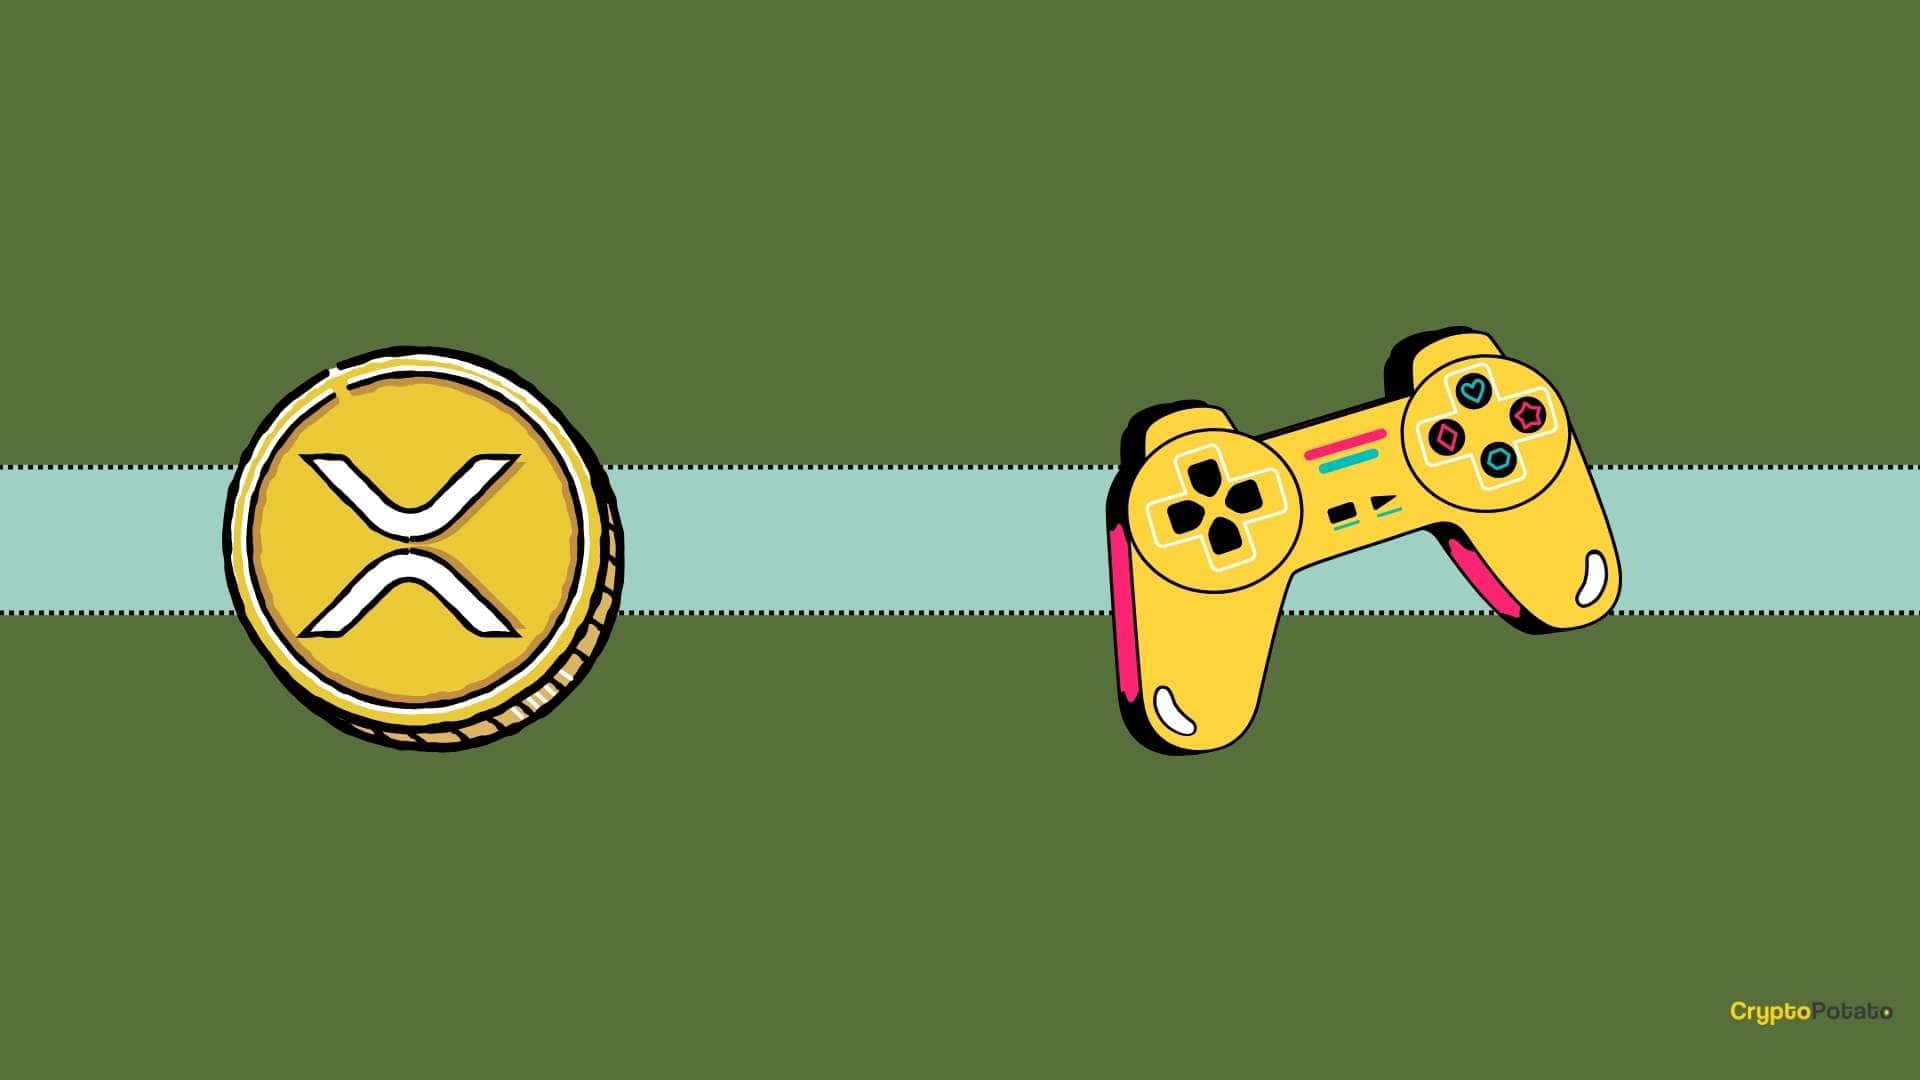 This Gaming Giant Now Accept’s Ripple (XRP) as a Payment Method